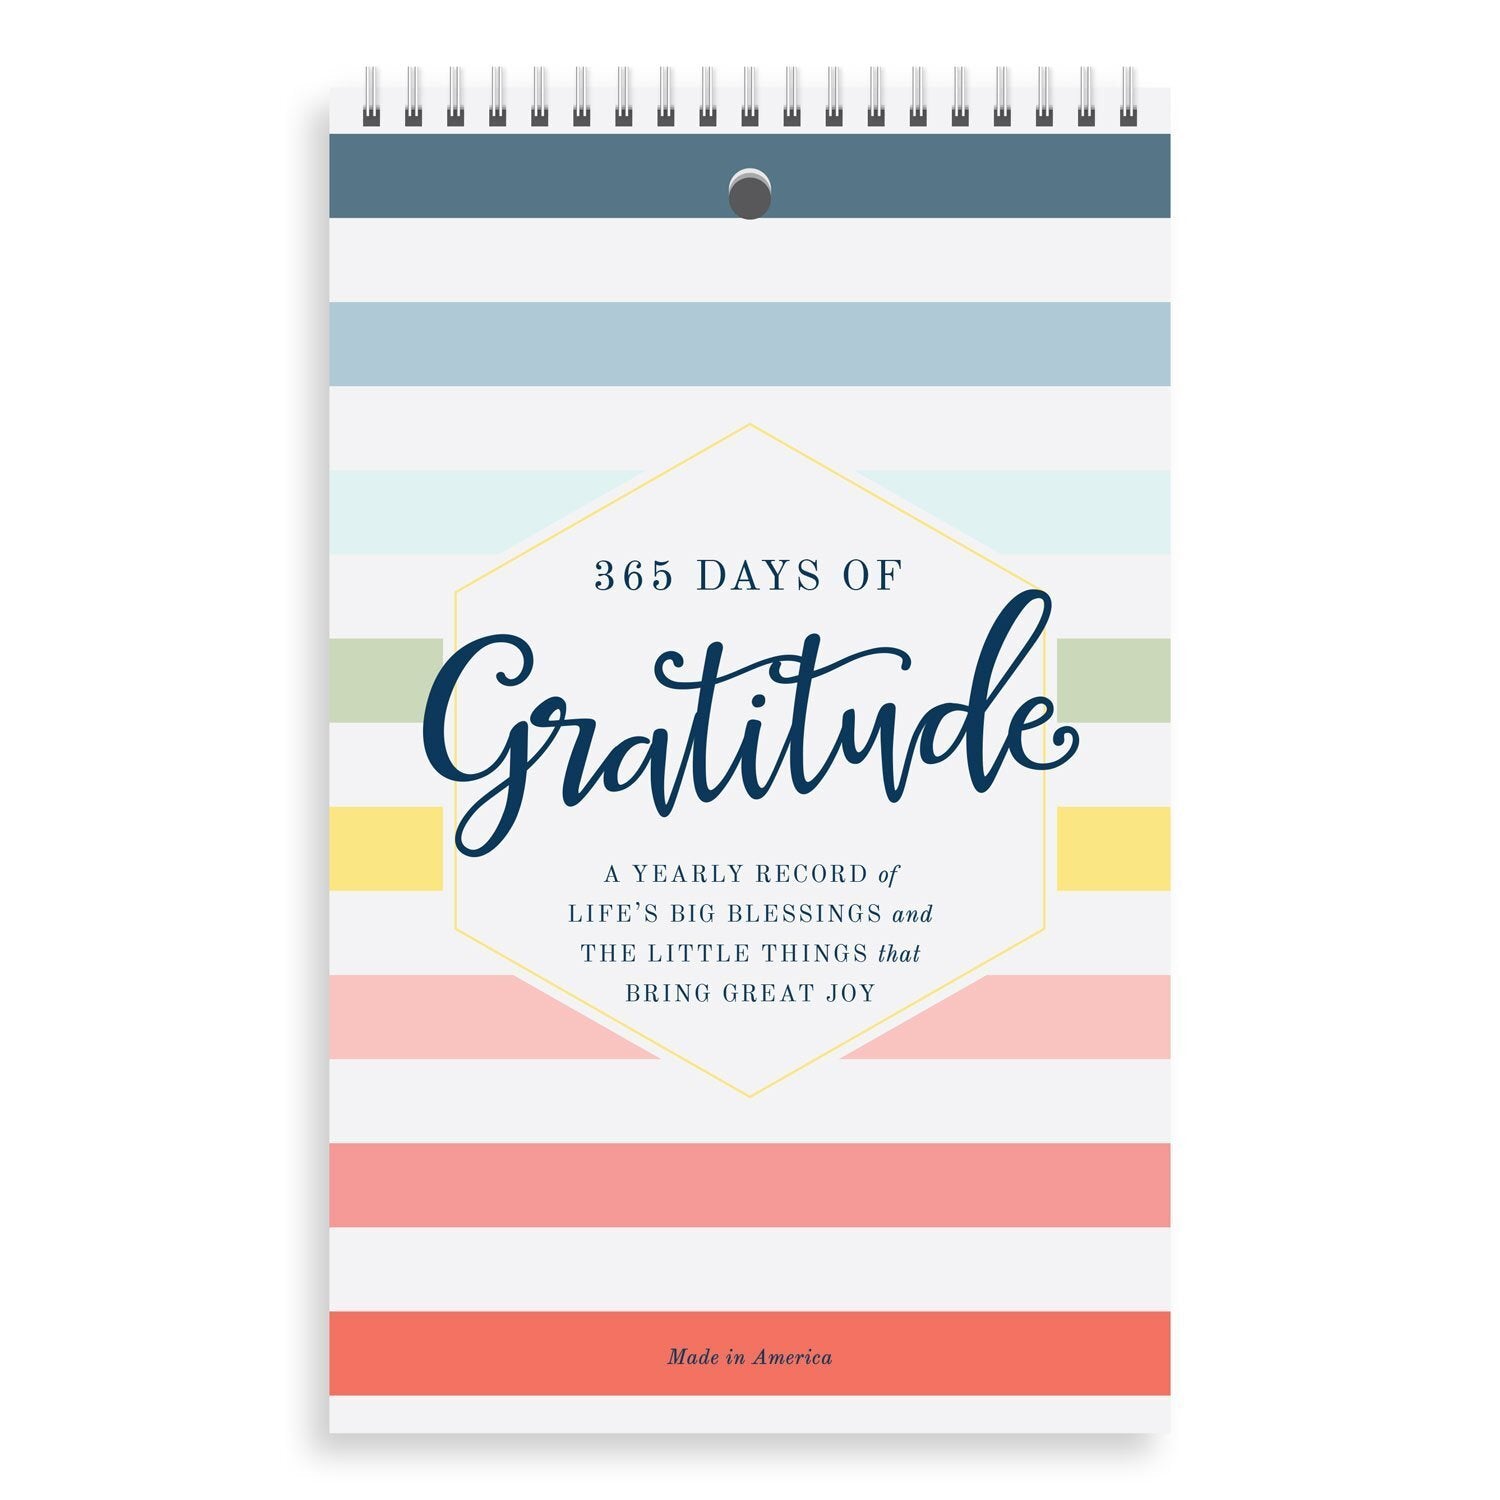 GRATITUDE JOURNAL FOR WOMEN: A 365 DAY JOURNAL OF By Dreamstorm  Publications NEW 9781719188944